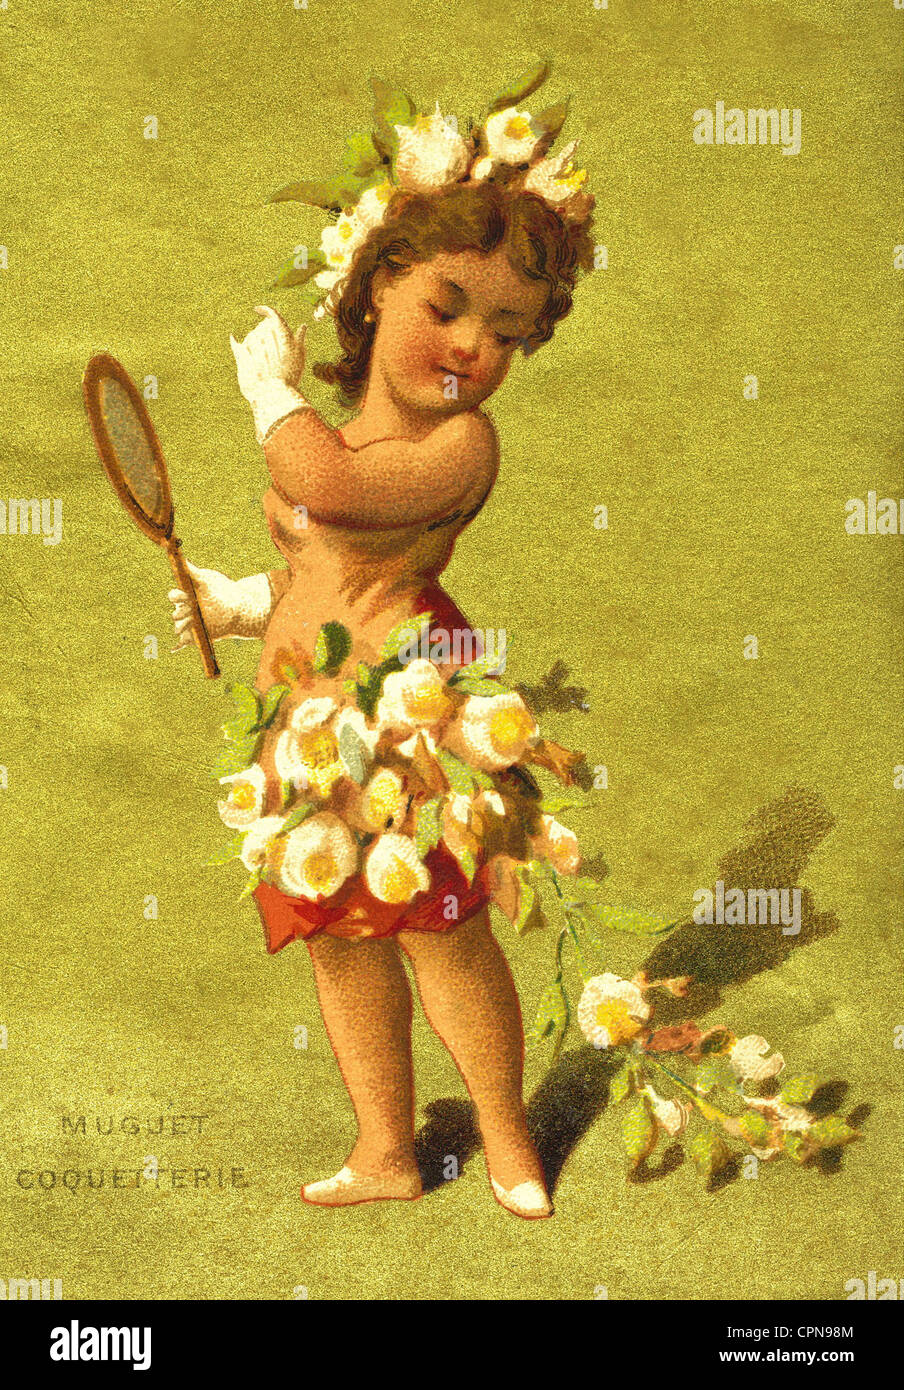 allegories, little girl in the guise of a flower, hair and skirt decorated with lily of the valley, France, circa 1895, Additional-Rights-Clearences-Not Available Stock Photo